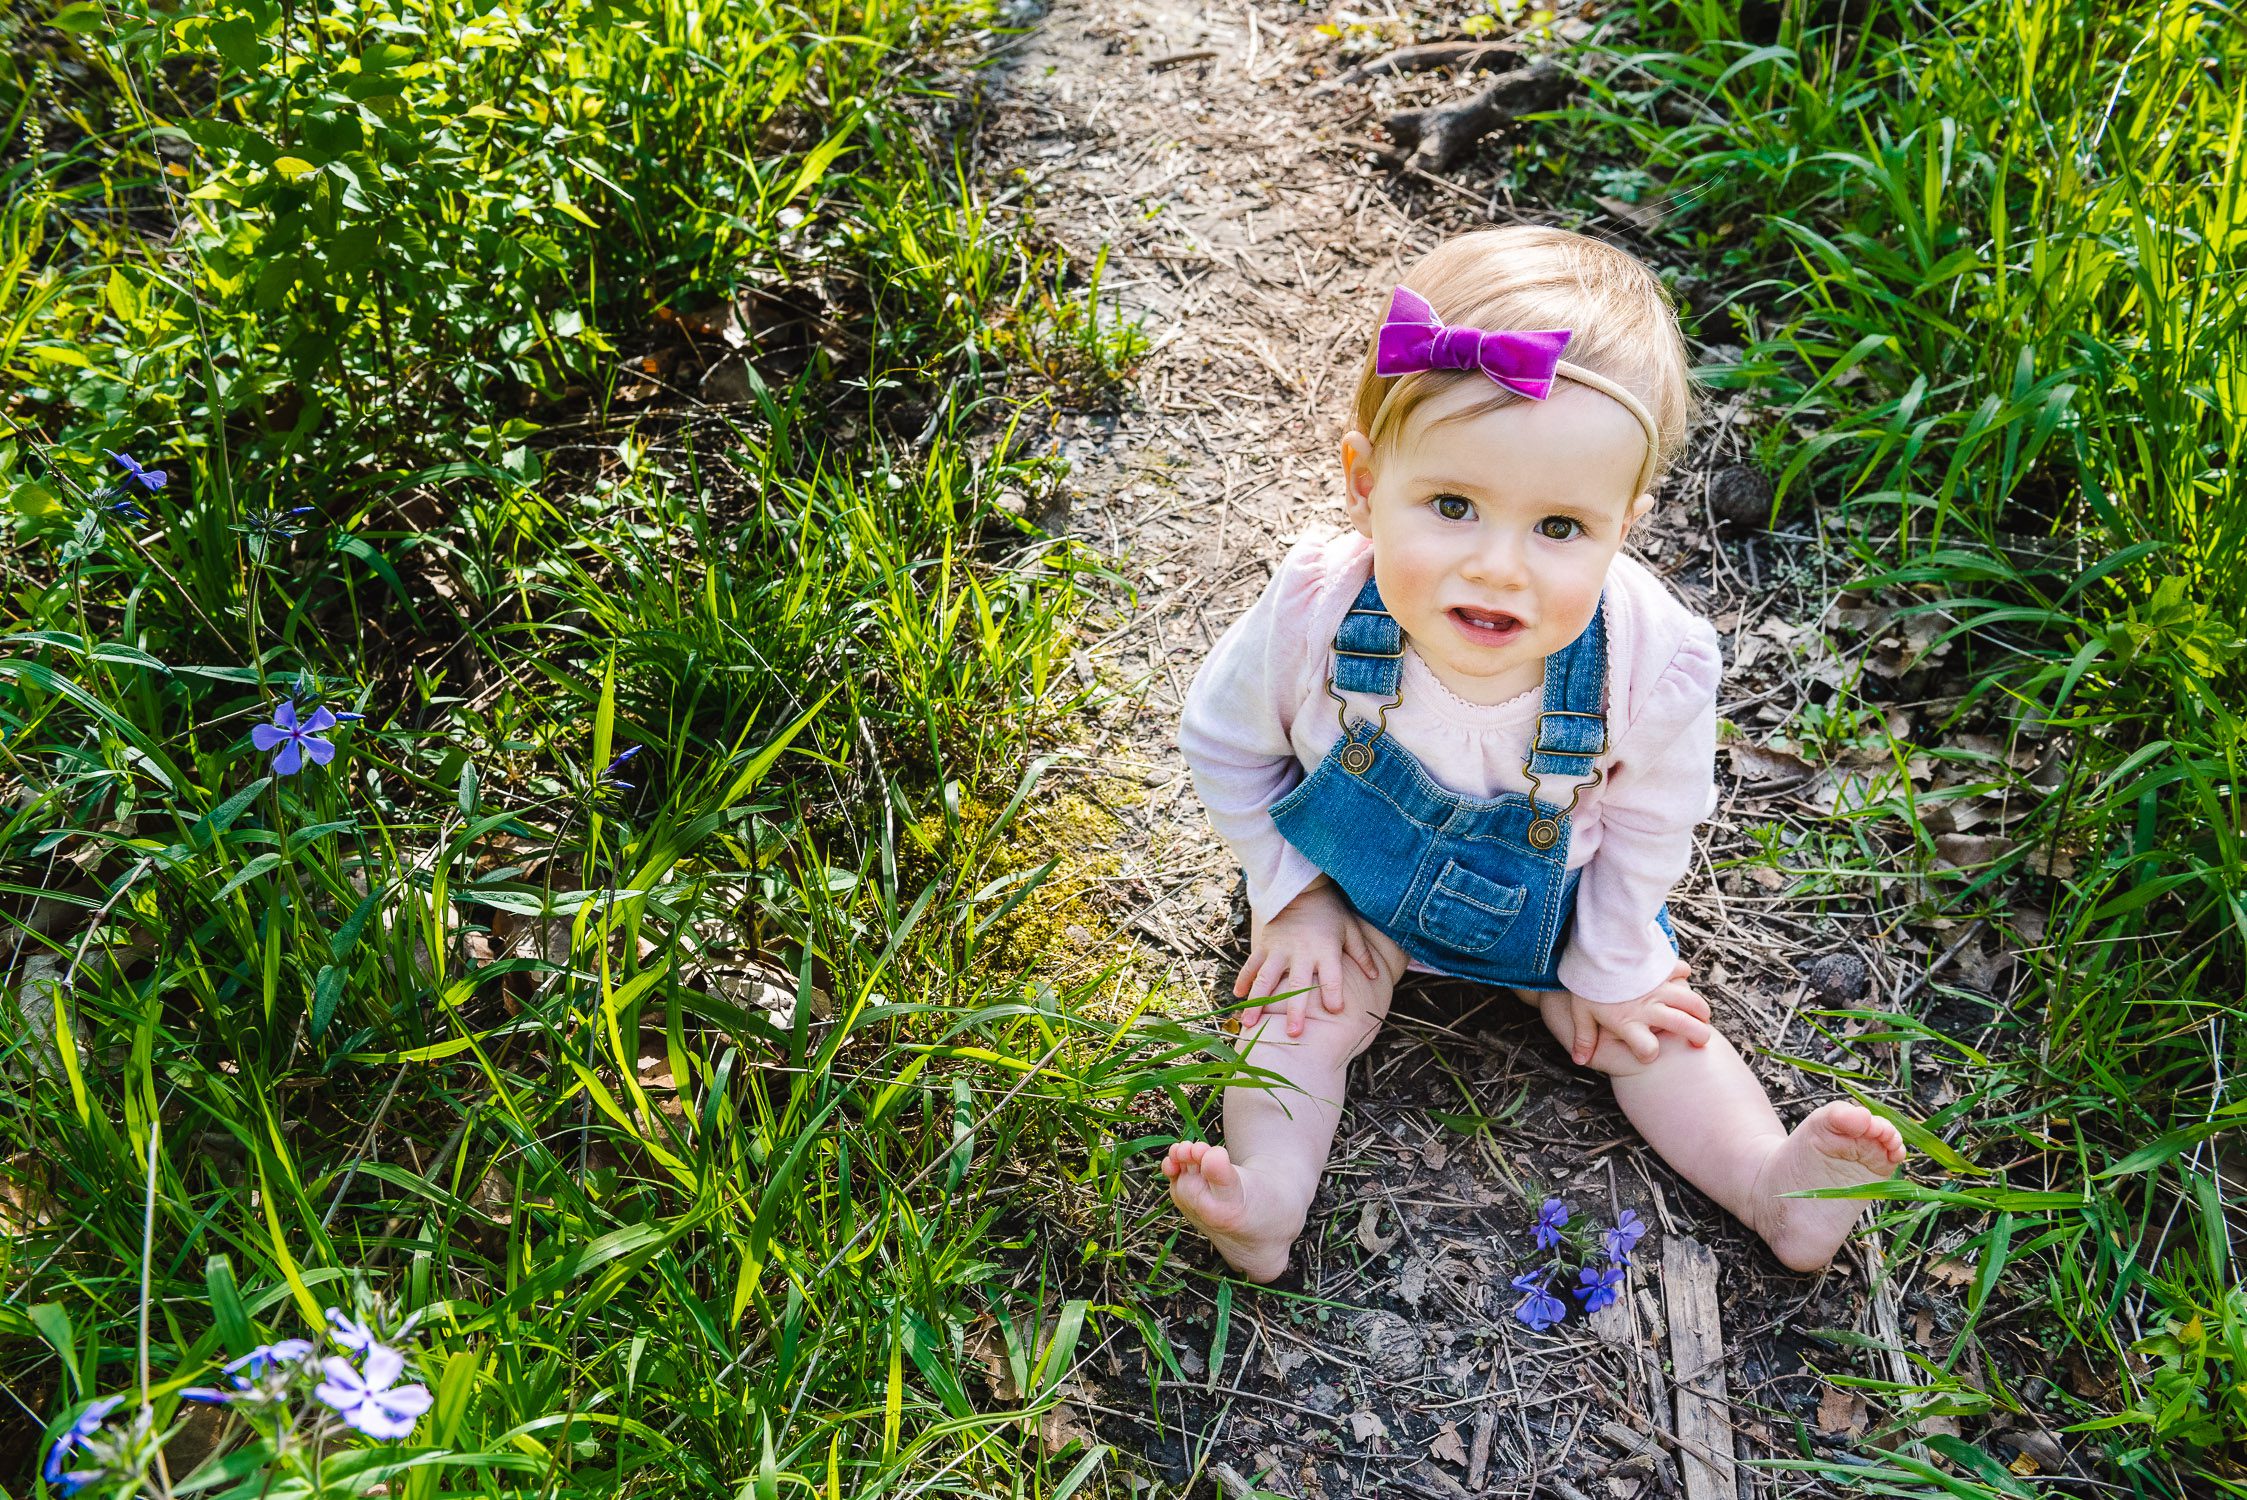 Daughter with bow in her hair sitting down on a trail at Capen Park for family photographs - Kasmann Family Photos by Schaefer Photography in Columbia, Missouri.